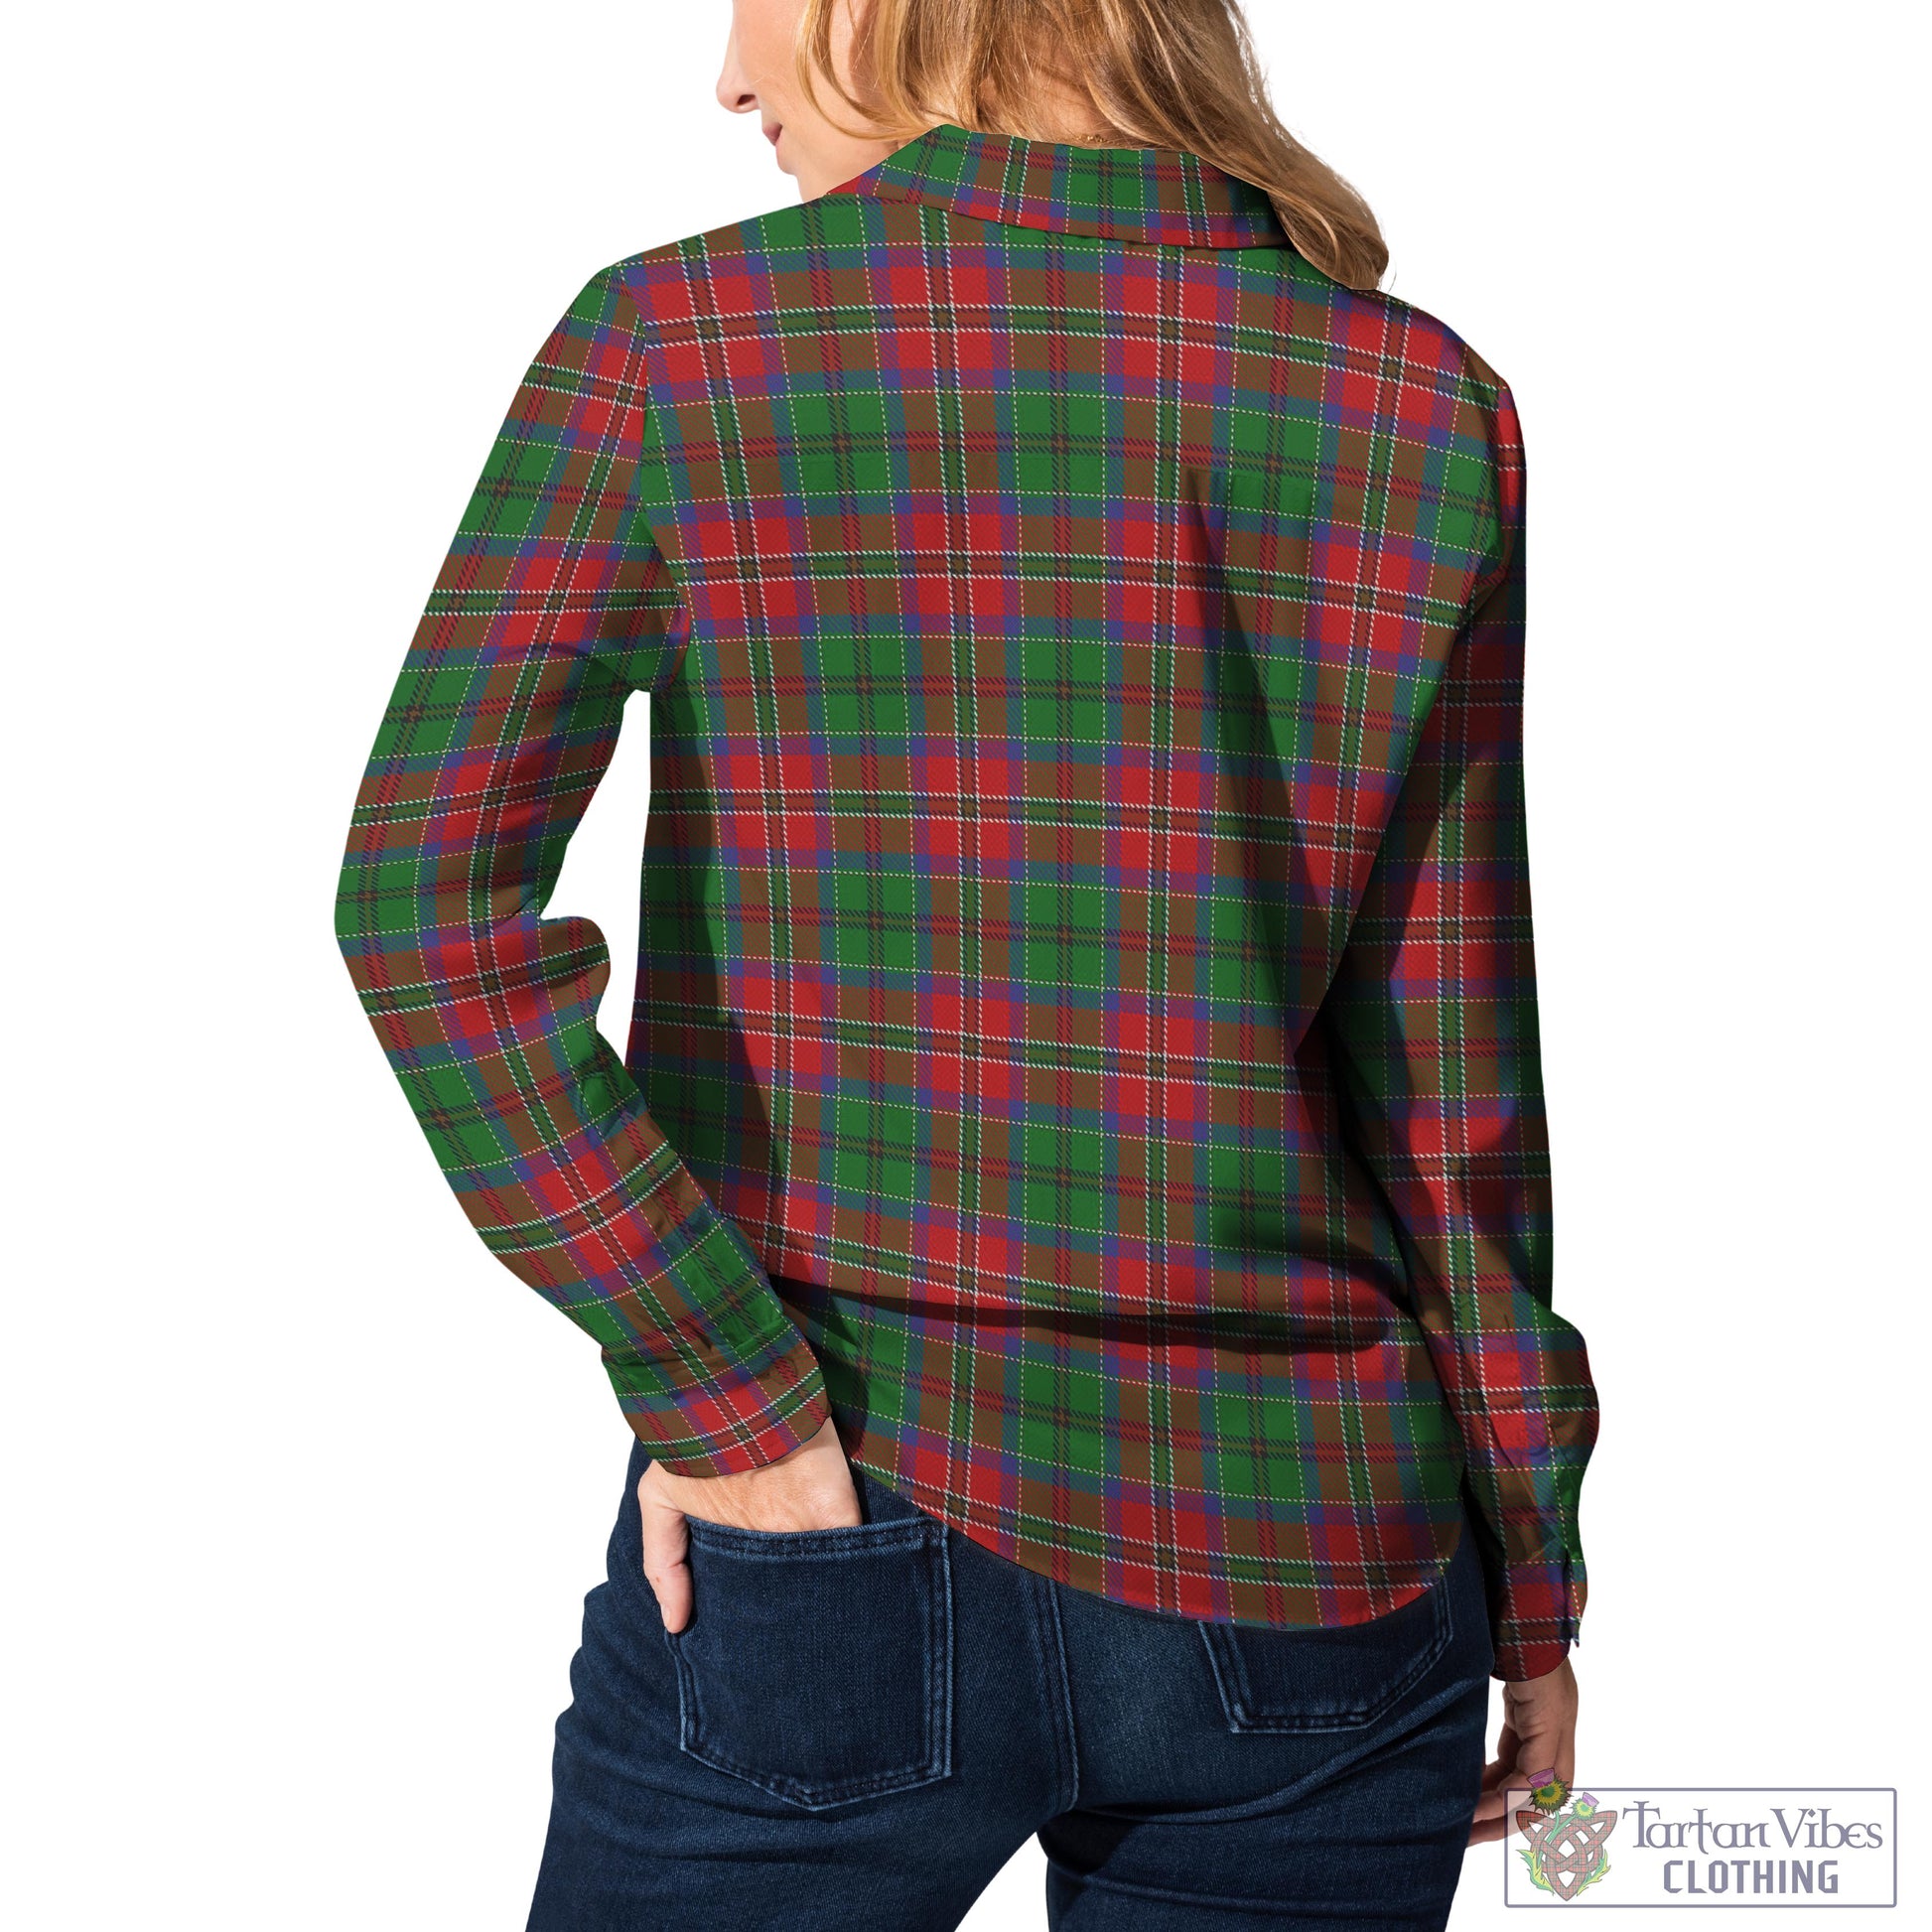 Tartan Vibes Clothing MacCulloch Tartan Womens Casual Shirt with Family Crest